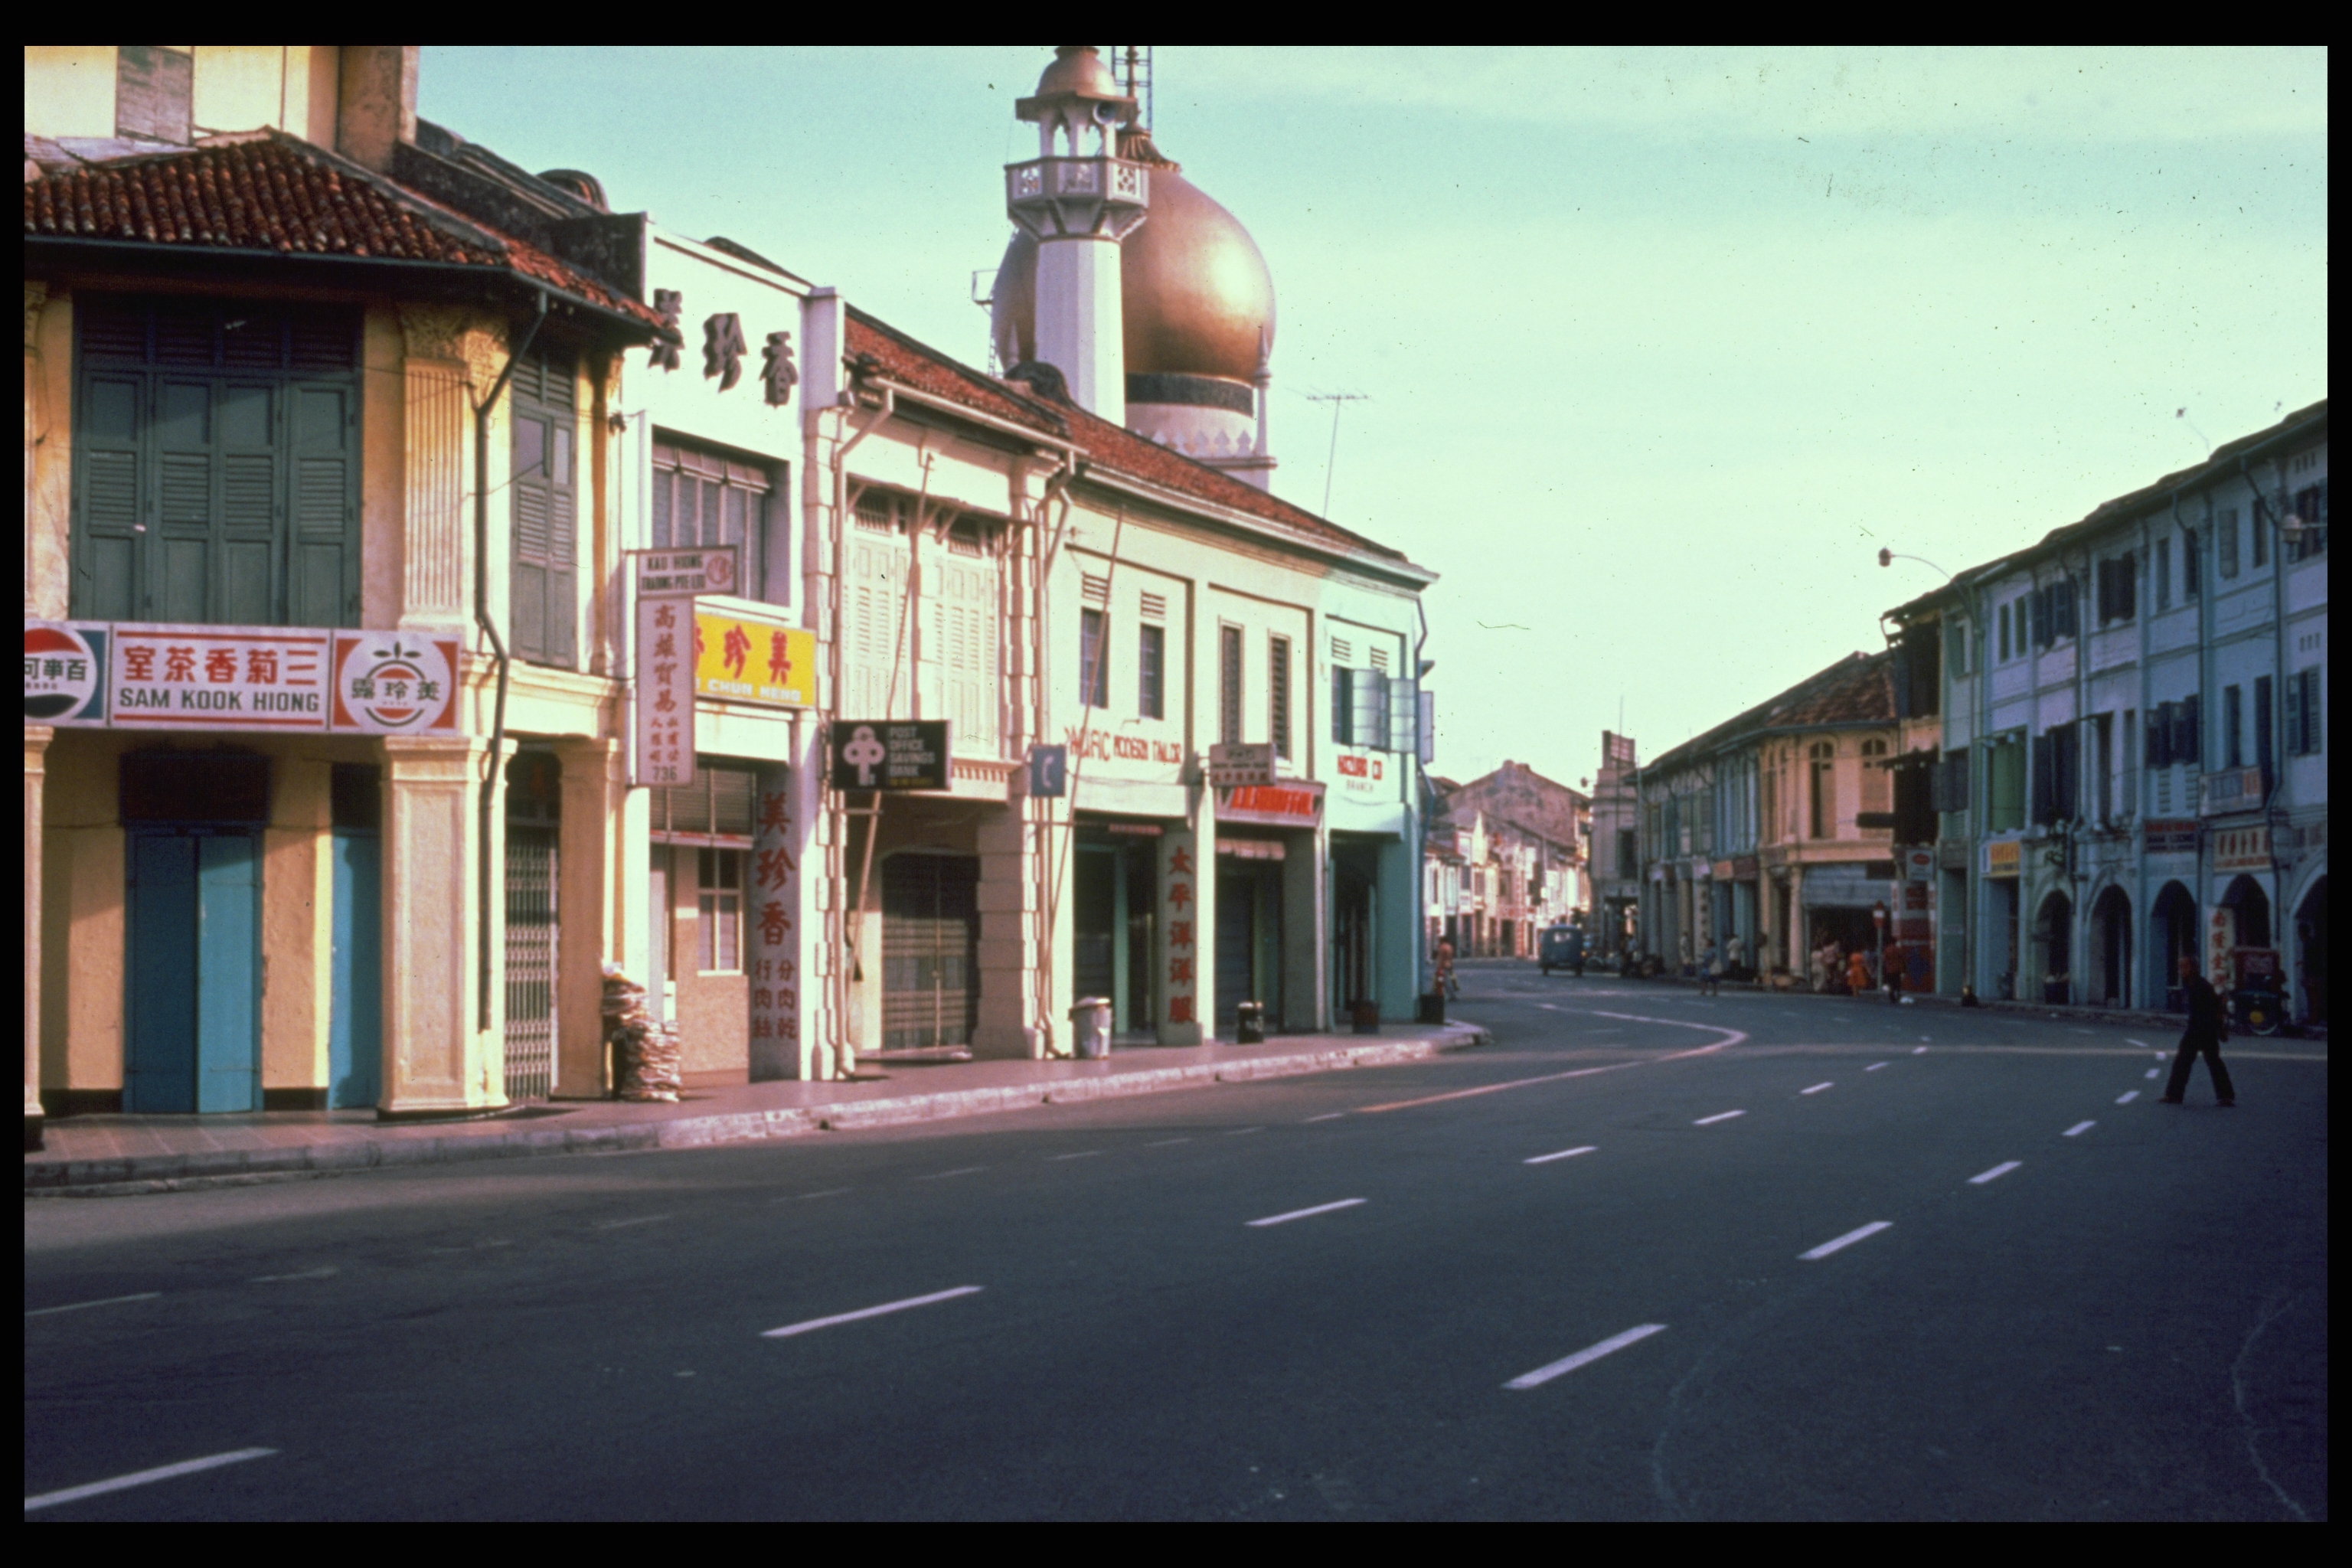 North Bridge Road, with top of Sultan Mosque visible, 1979. Paul Piollet Collection, courtesy of National Archives of Singapore